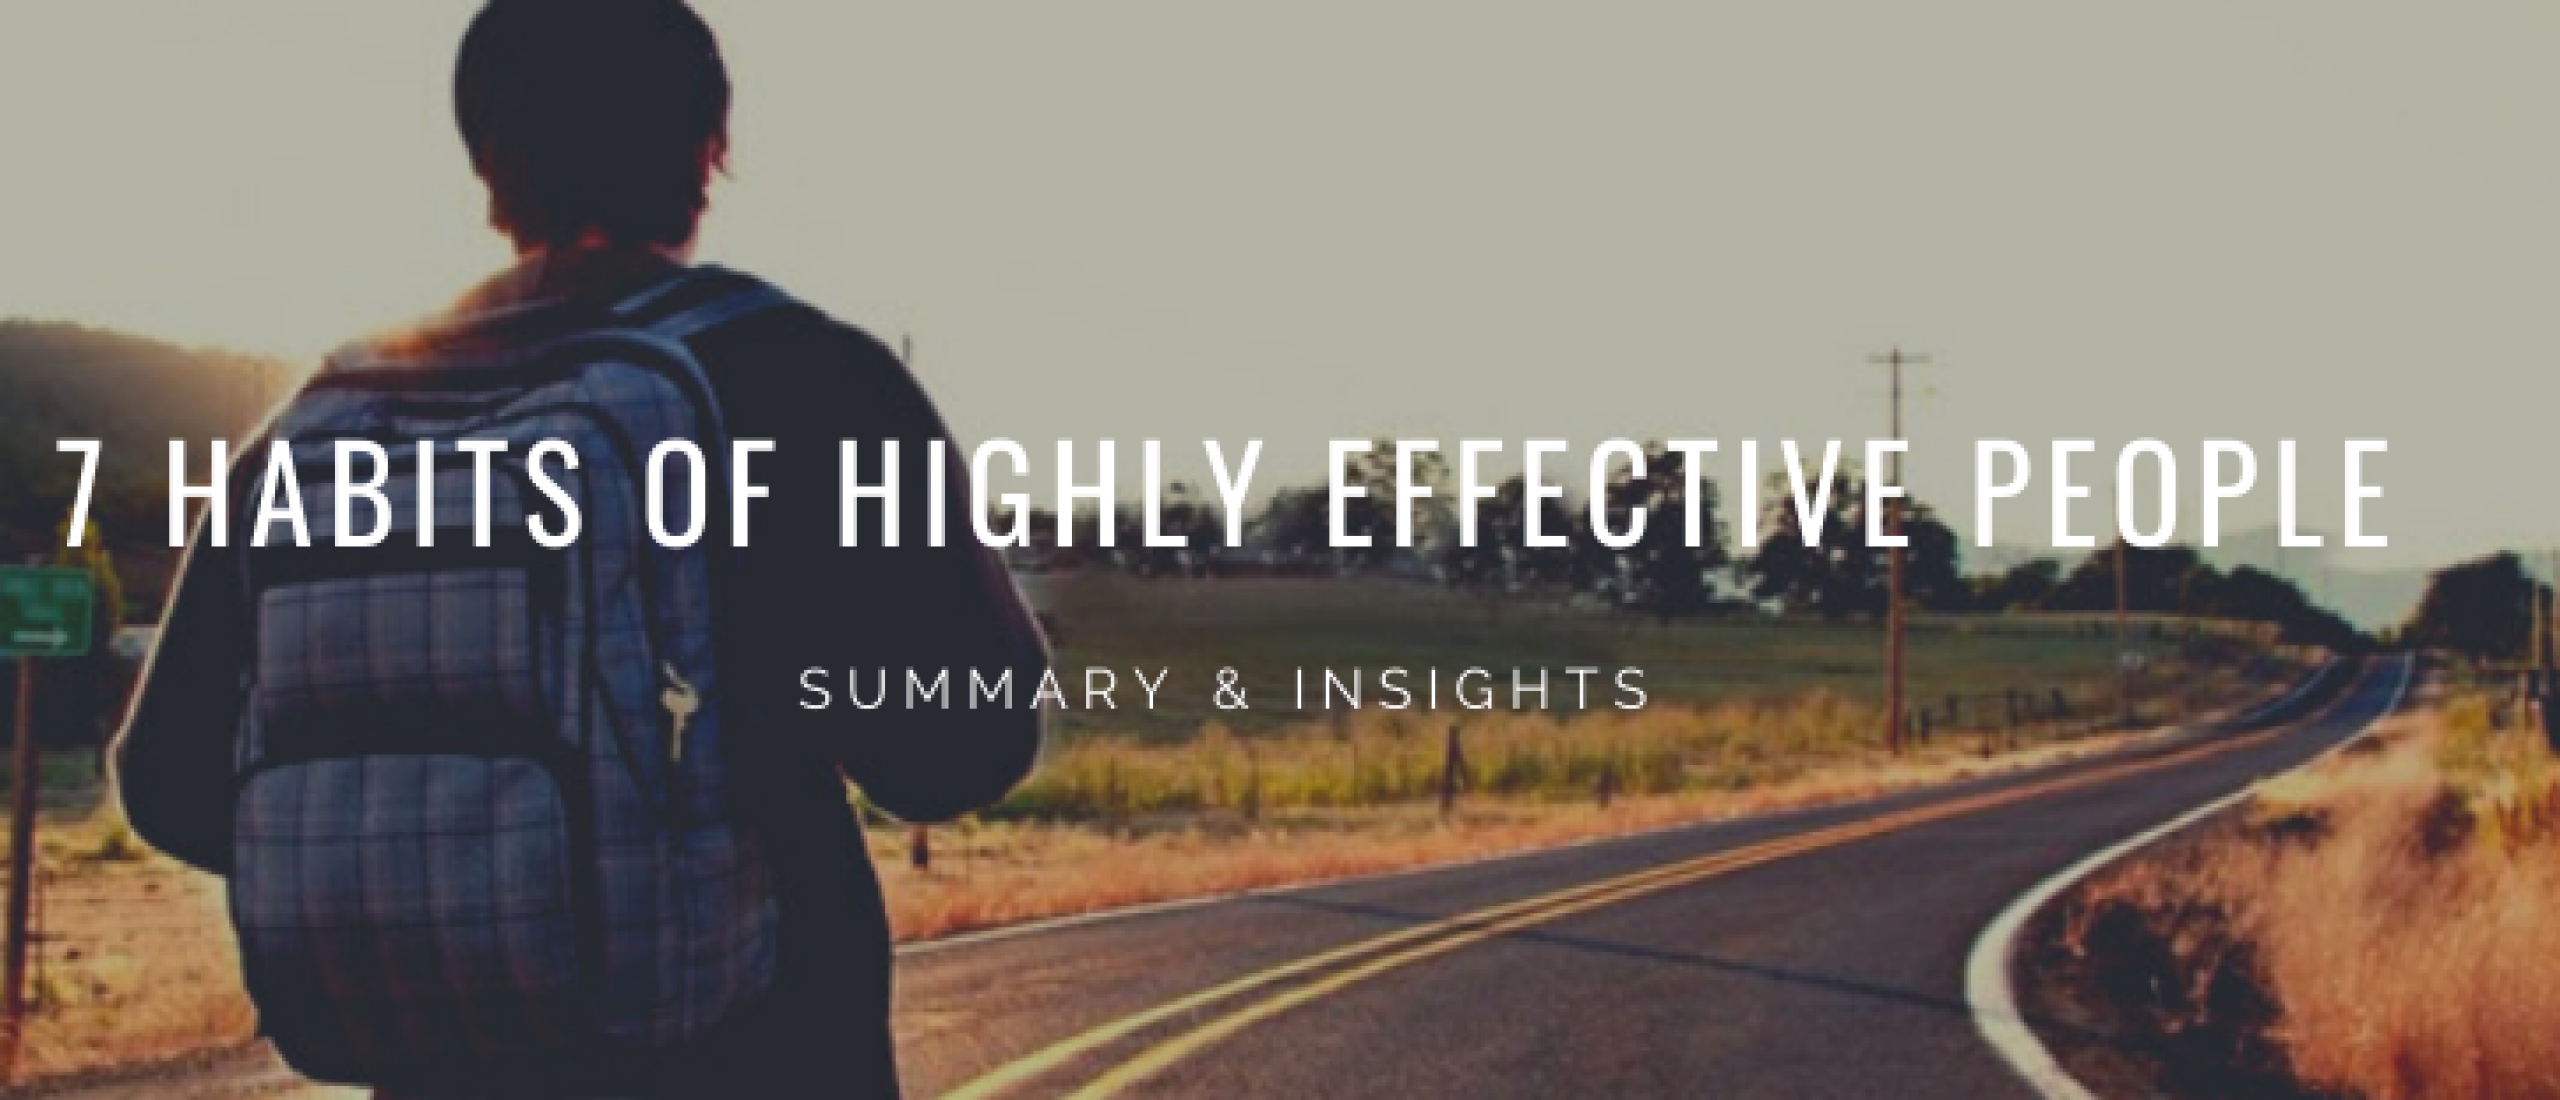 Summary 7 Habits of Highly Effective People